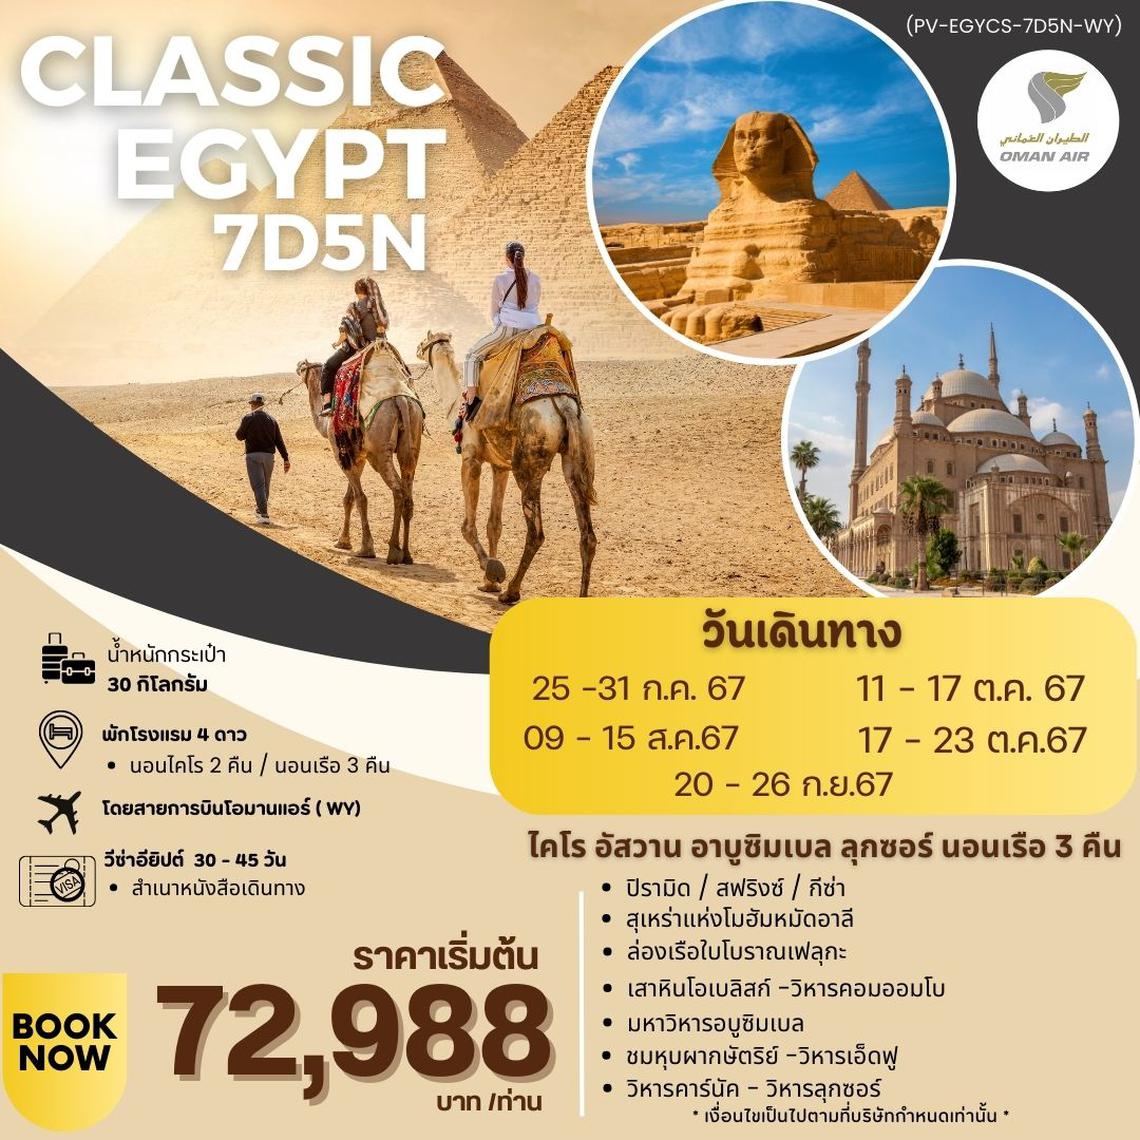 CLASSIC EGYPT 7D 5N BY WY